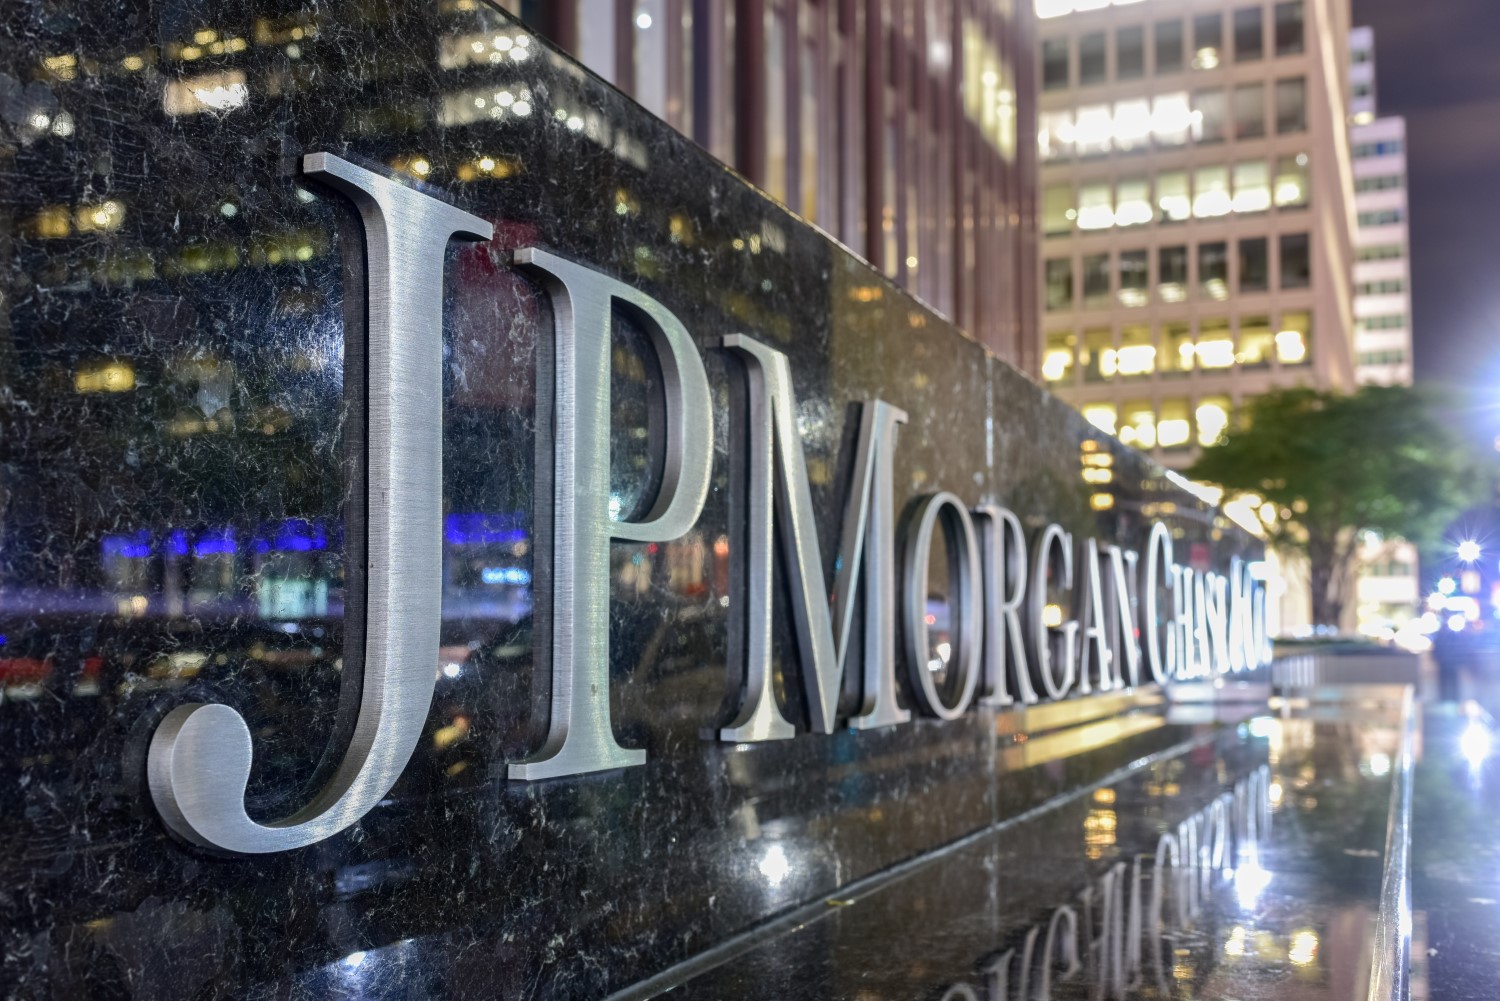 JPMorgan to Develop Payment Blockchain System For Siemens: Report